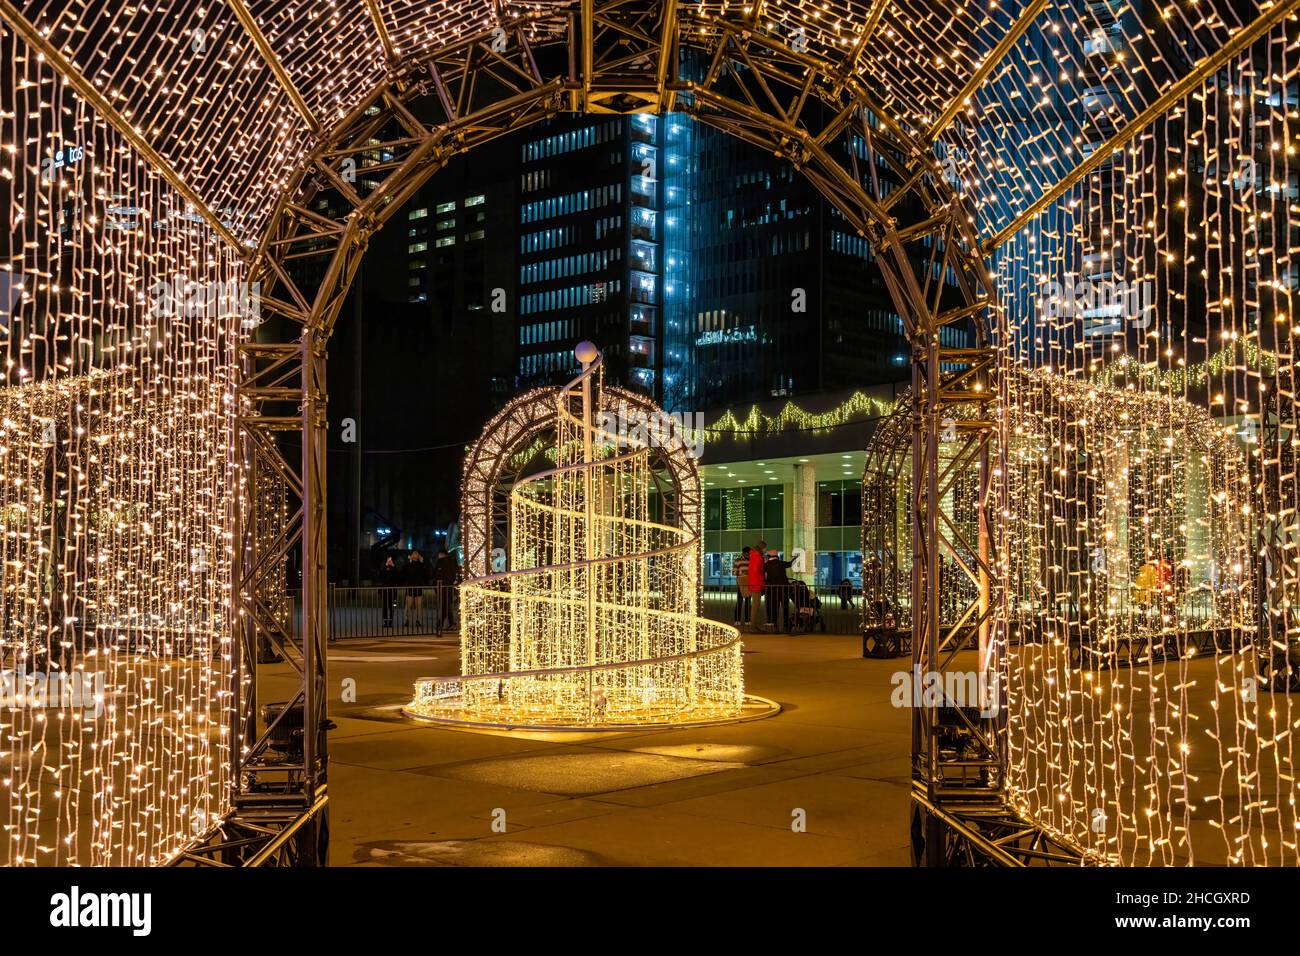 New set of lights installed in Nathan Phillips Square to celebrate the year end holidays. Dec. 29, 2021 Stock Photo